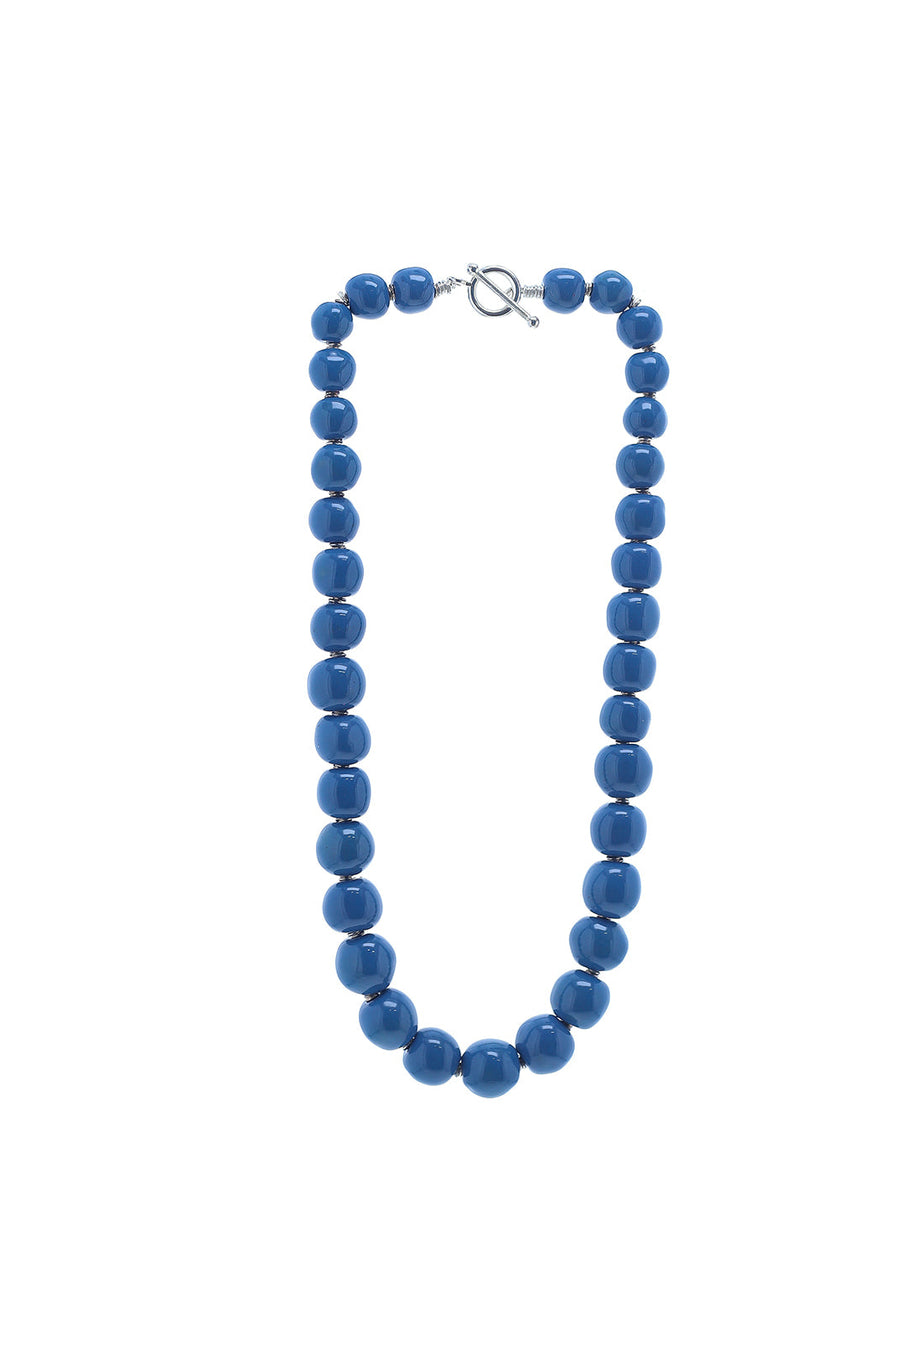 Mexican Blue Necklace - Petit Tango bead